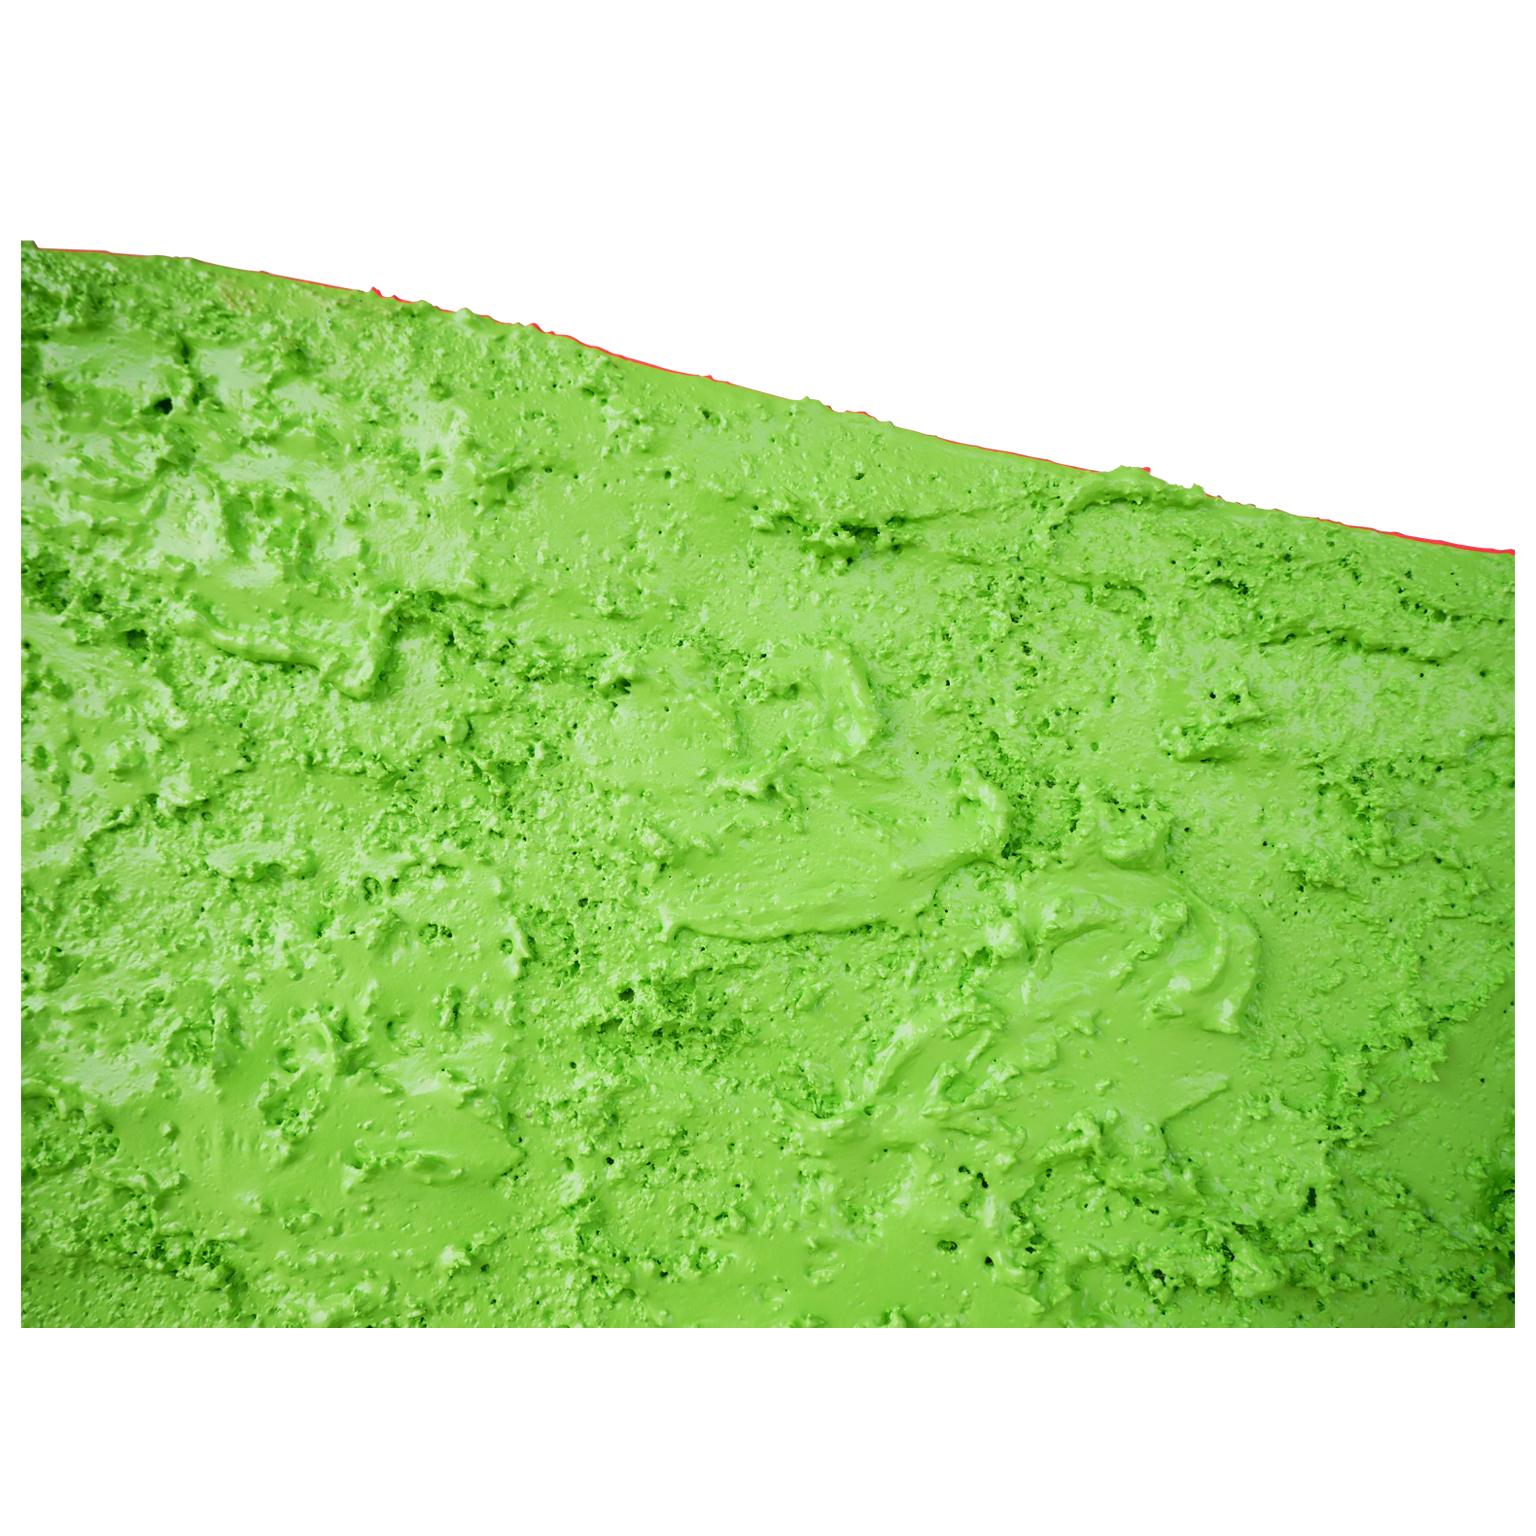 Abstract textured biomorphic shape painted with bright green pigment by contemporary Houston, TX artist Matthew Reeves. The work is designed to hang away from the wall and cast a shadow around the piece. The dynamic texture combined with the